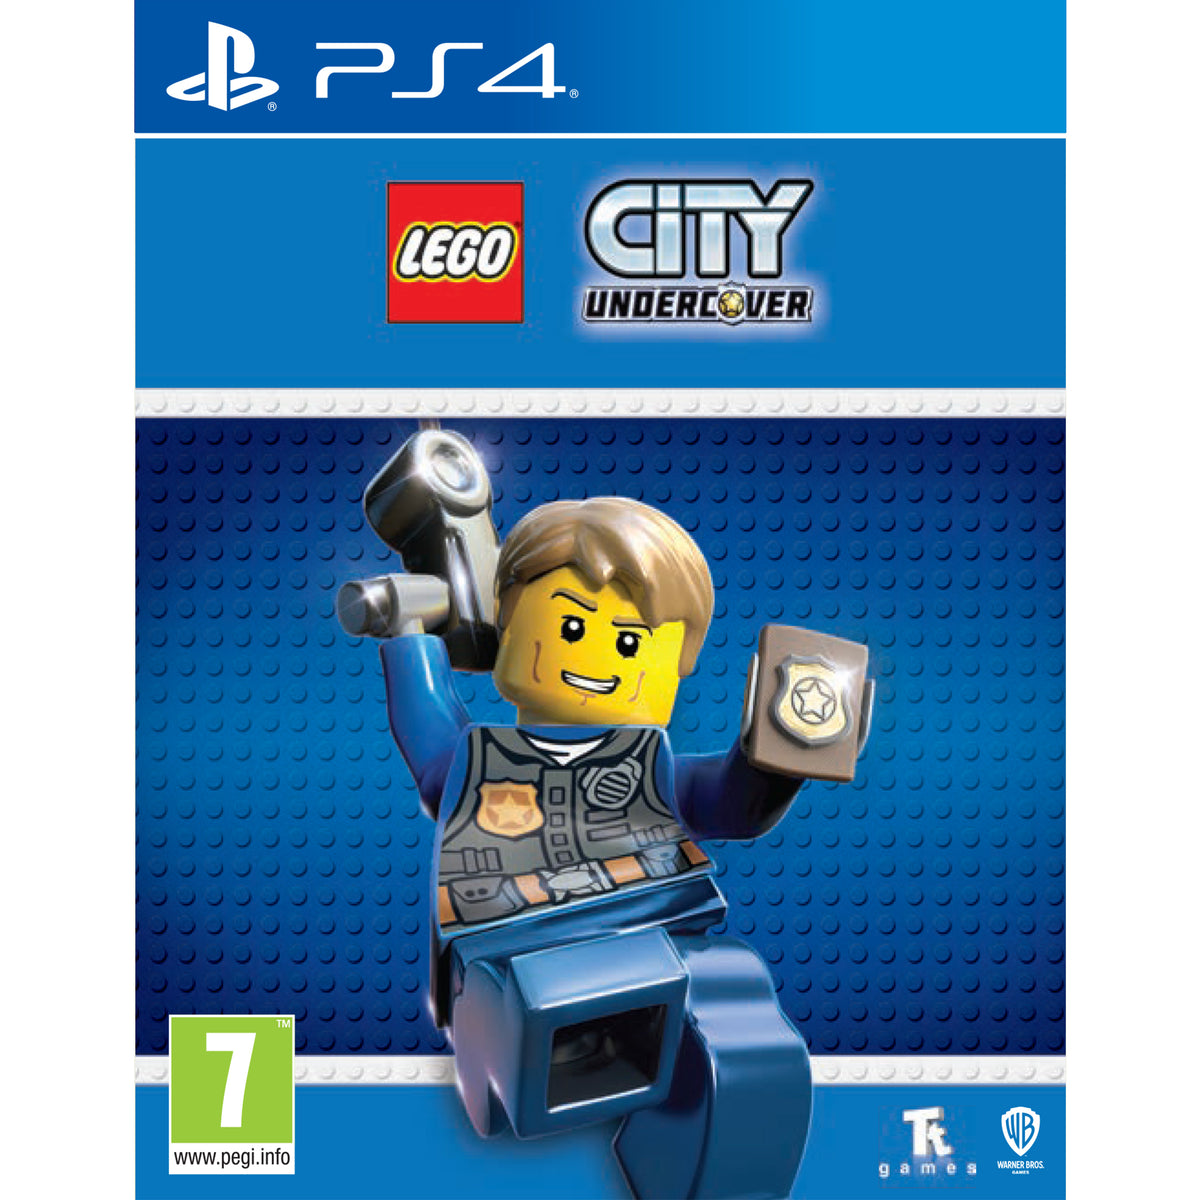 LEGO City PS4 – Entertainment Go's Of The Day!